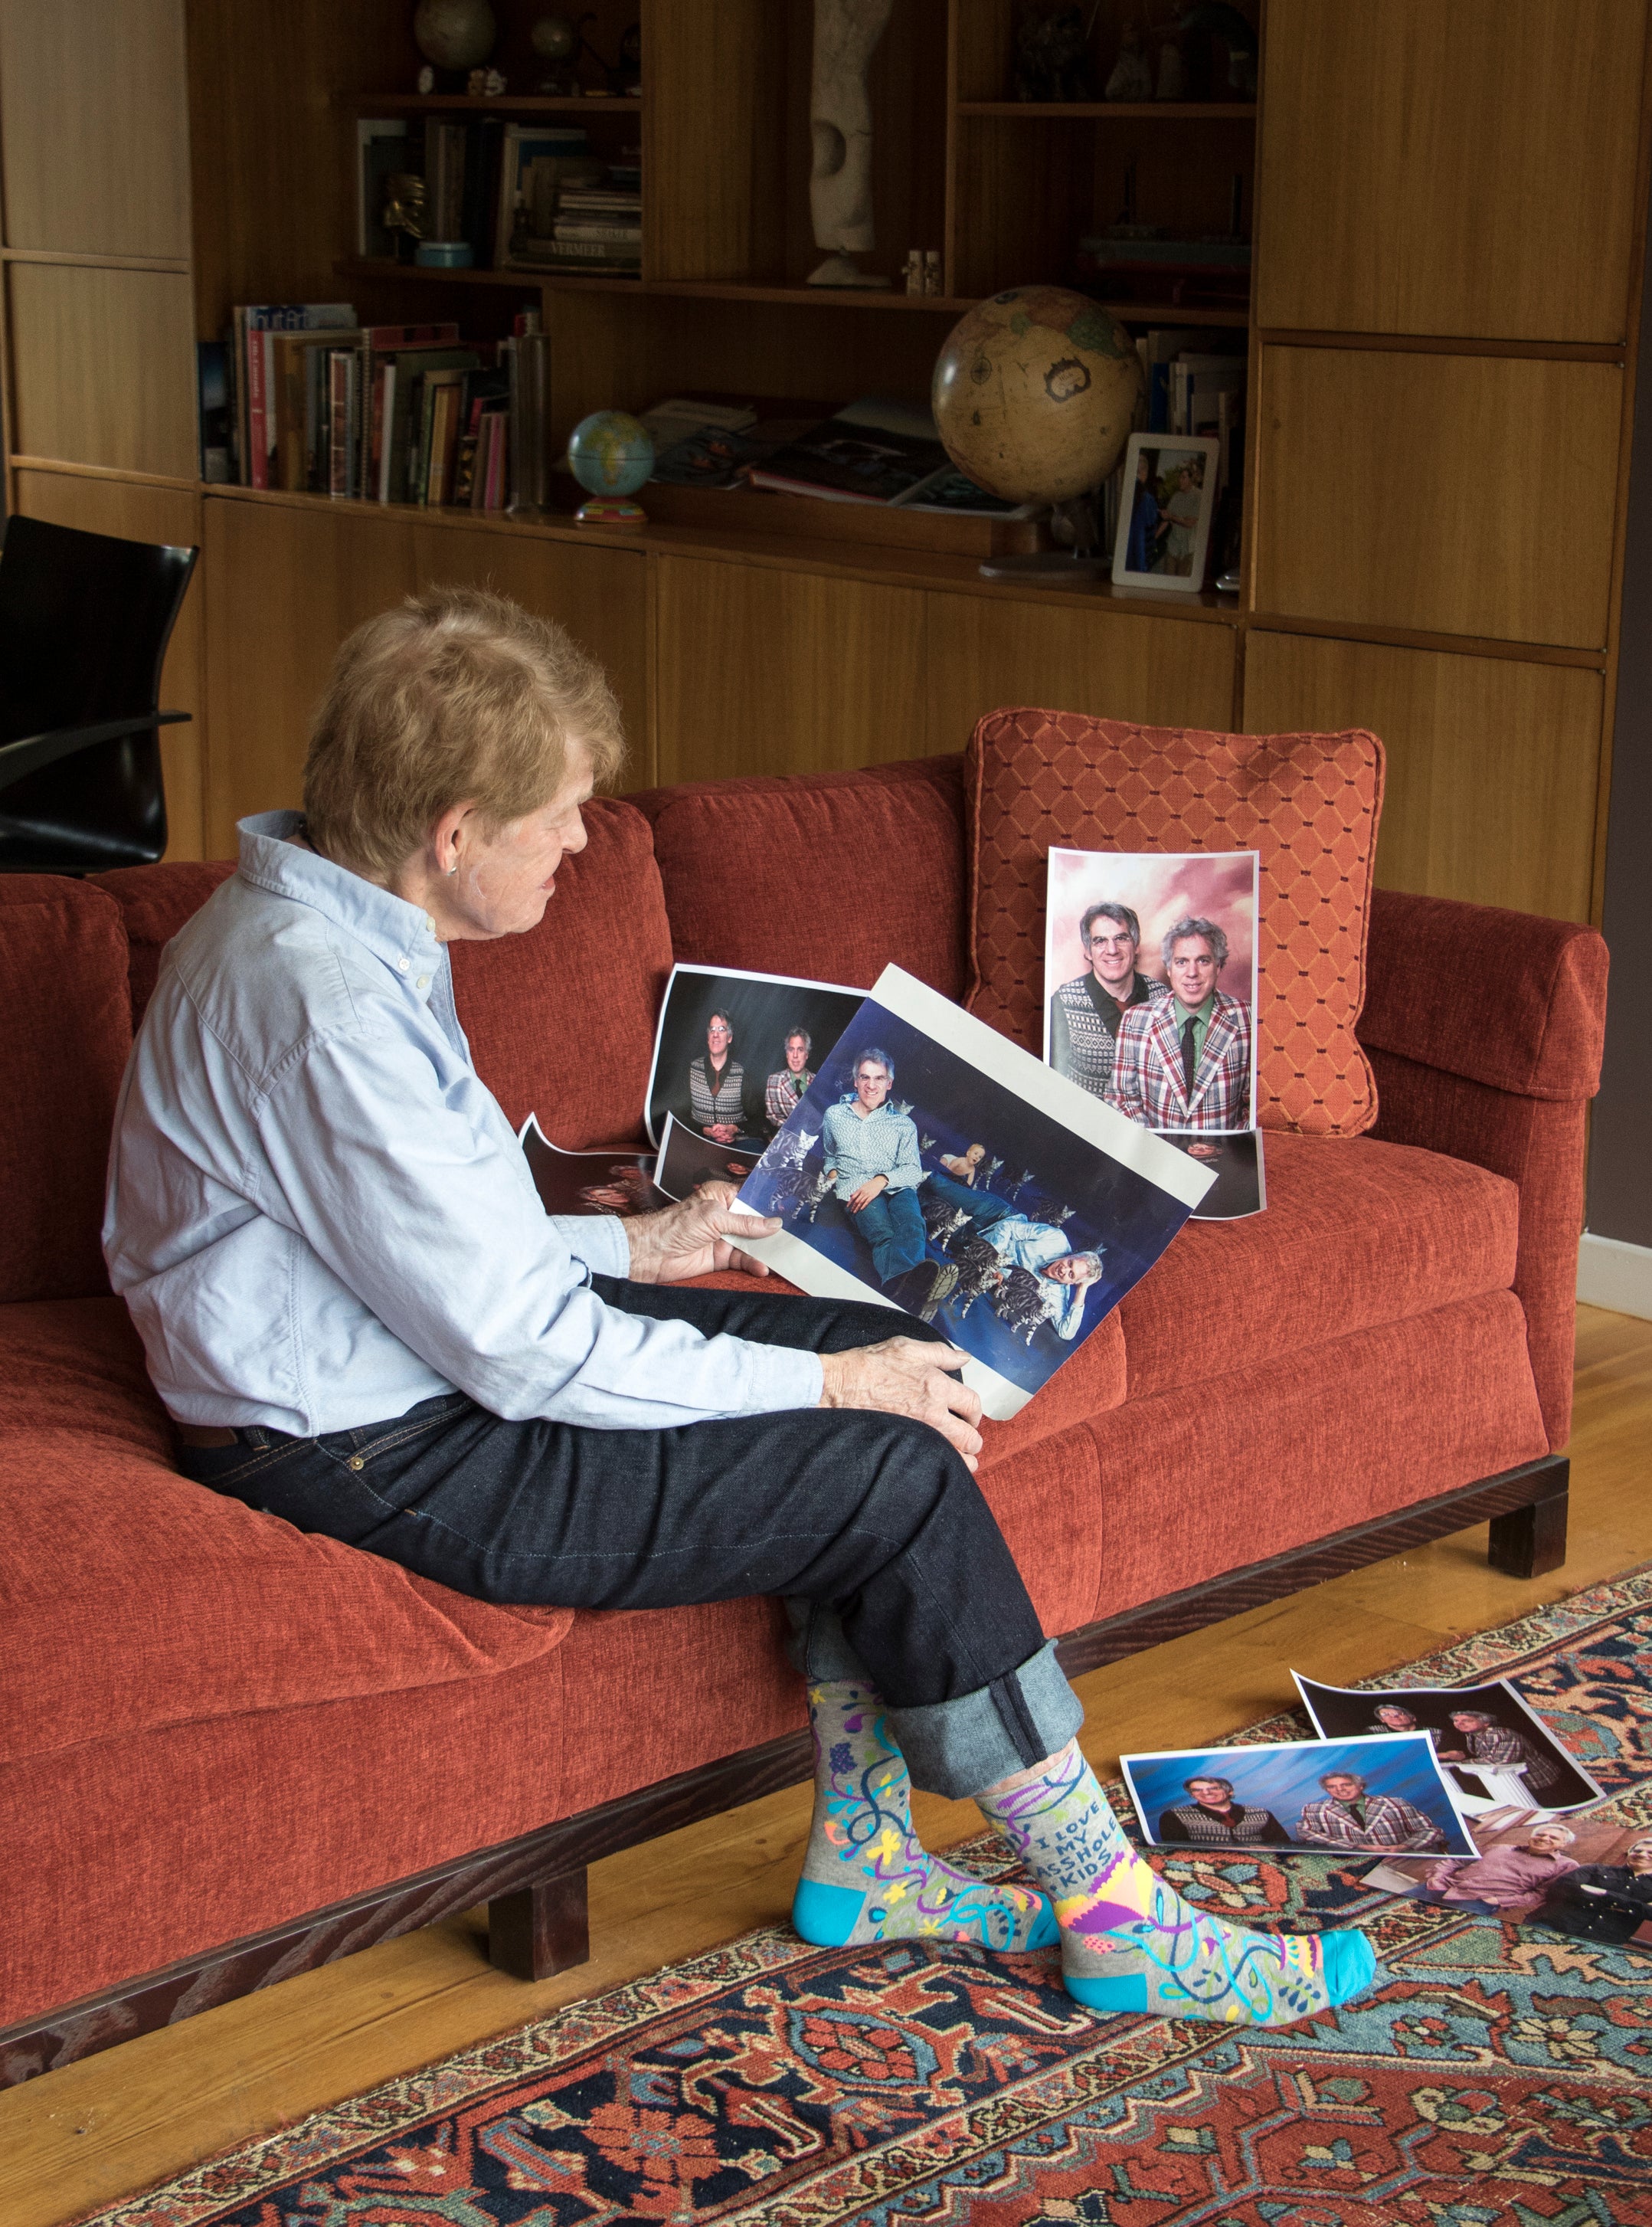 An older man is pictured sitting on a red couch looking at old photos of his family. On his feet are the 